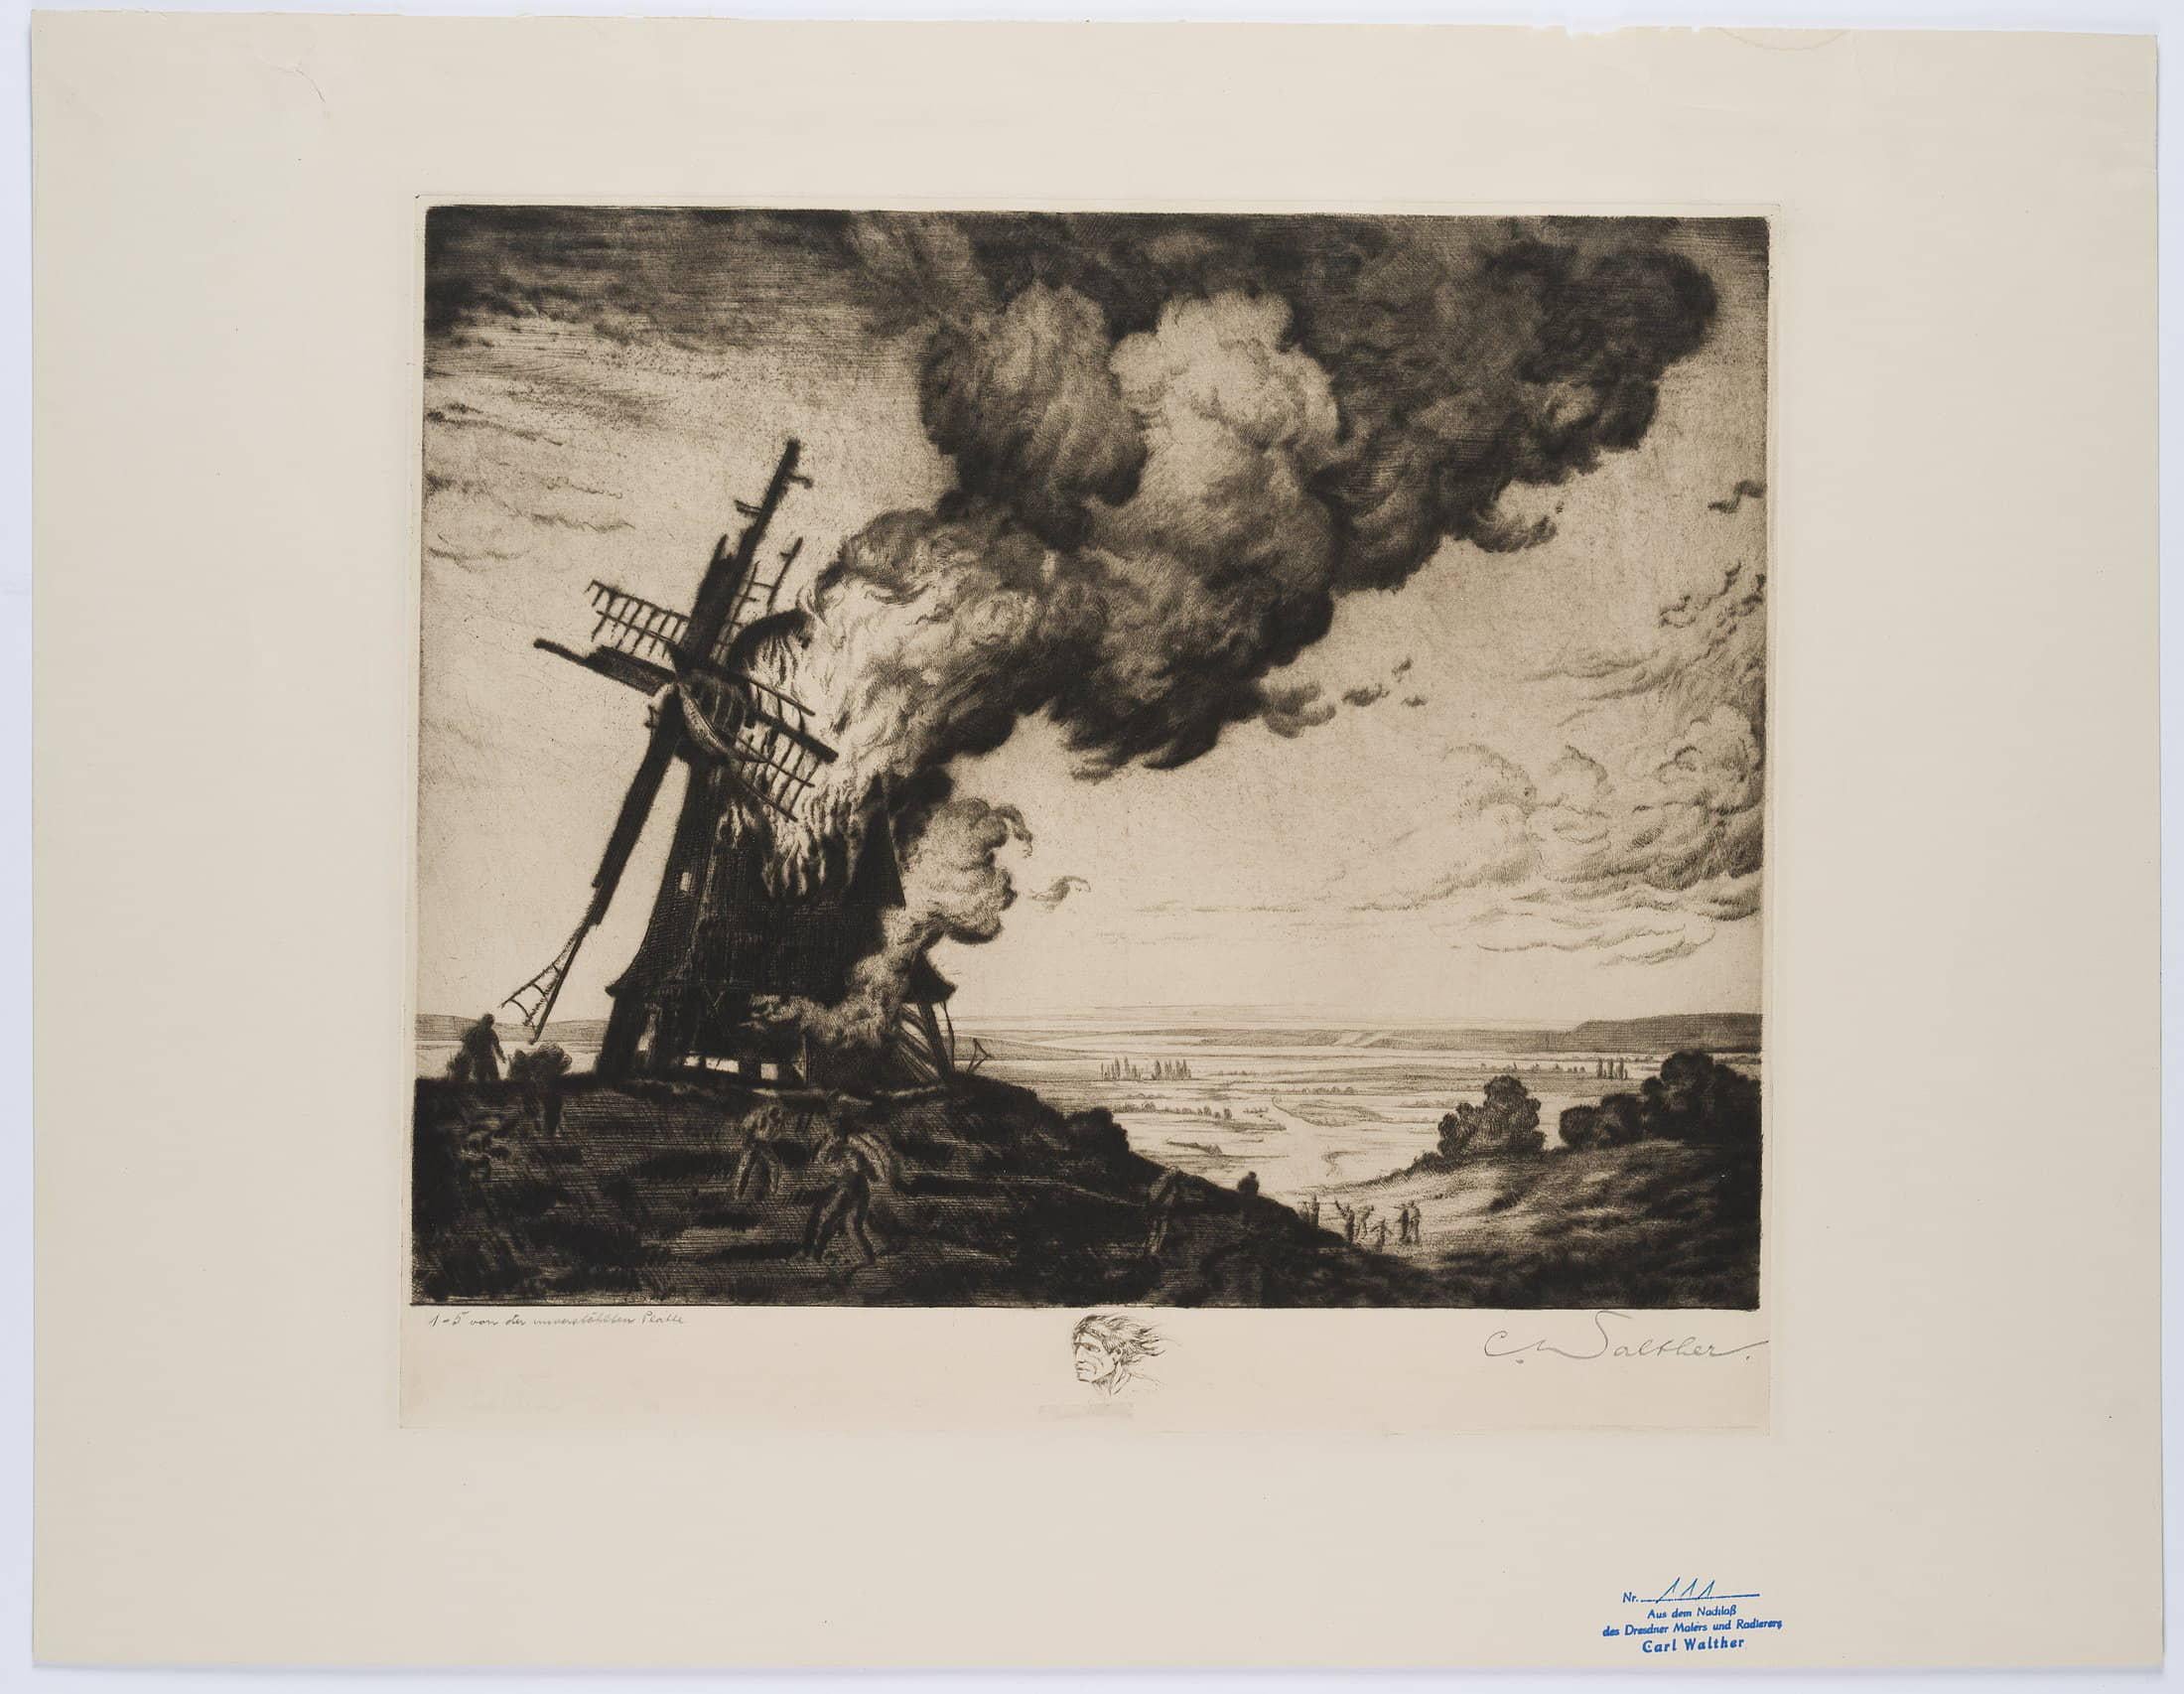 Carl August Walther (1880 Leipzig - 1956 Dresden): The mill fire, proof with border incursion, 20th century, Etching

Technique: Etching on Paper

Inscription: Inscribed and signed below the image, with estate stamp at lower right.

Date: 20th